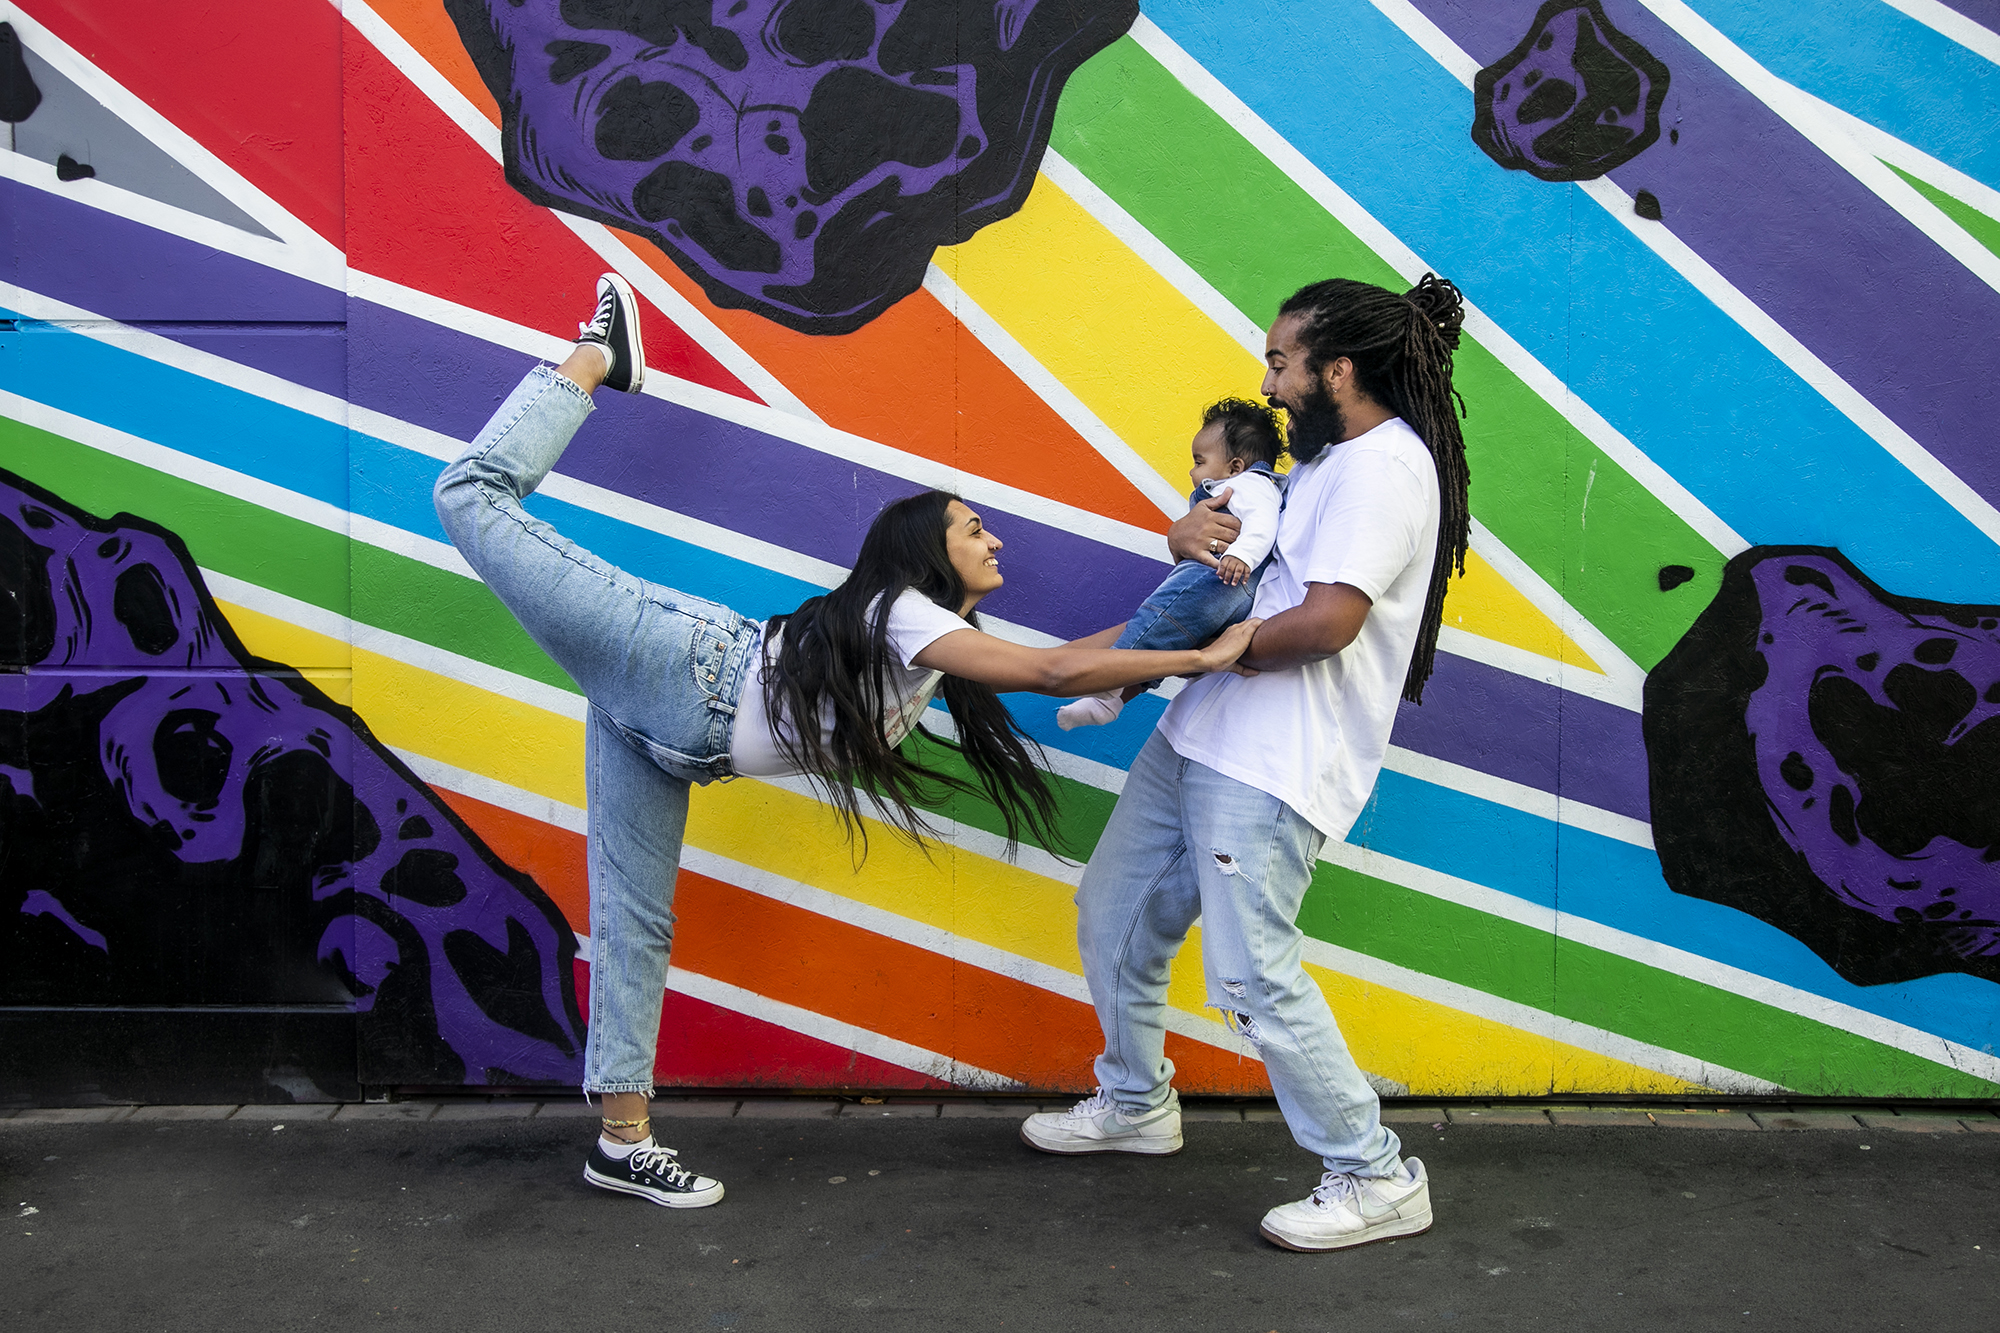 Family of 3. Global majority male with long dreadlocked hair holding baby, global majority female with long black hair, one leg up then reaching our leaning towards the baby. wearing blue jeans, trainers and white tshirts infront of rainbow graffiti wall. 